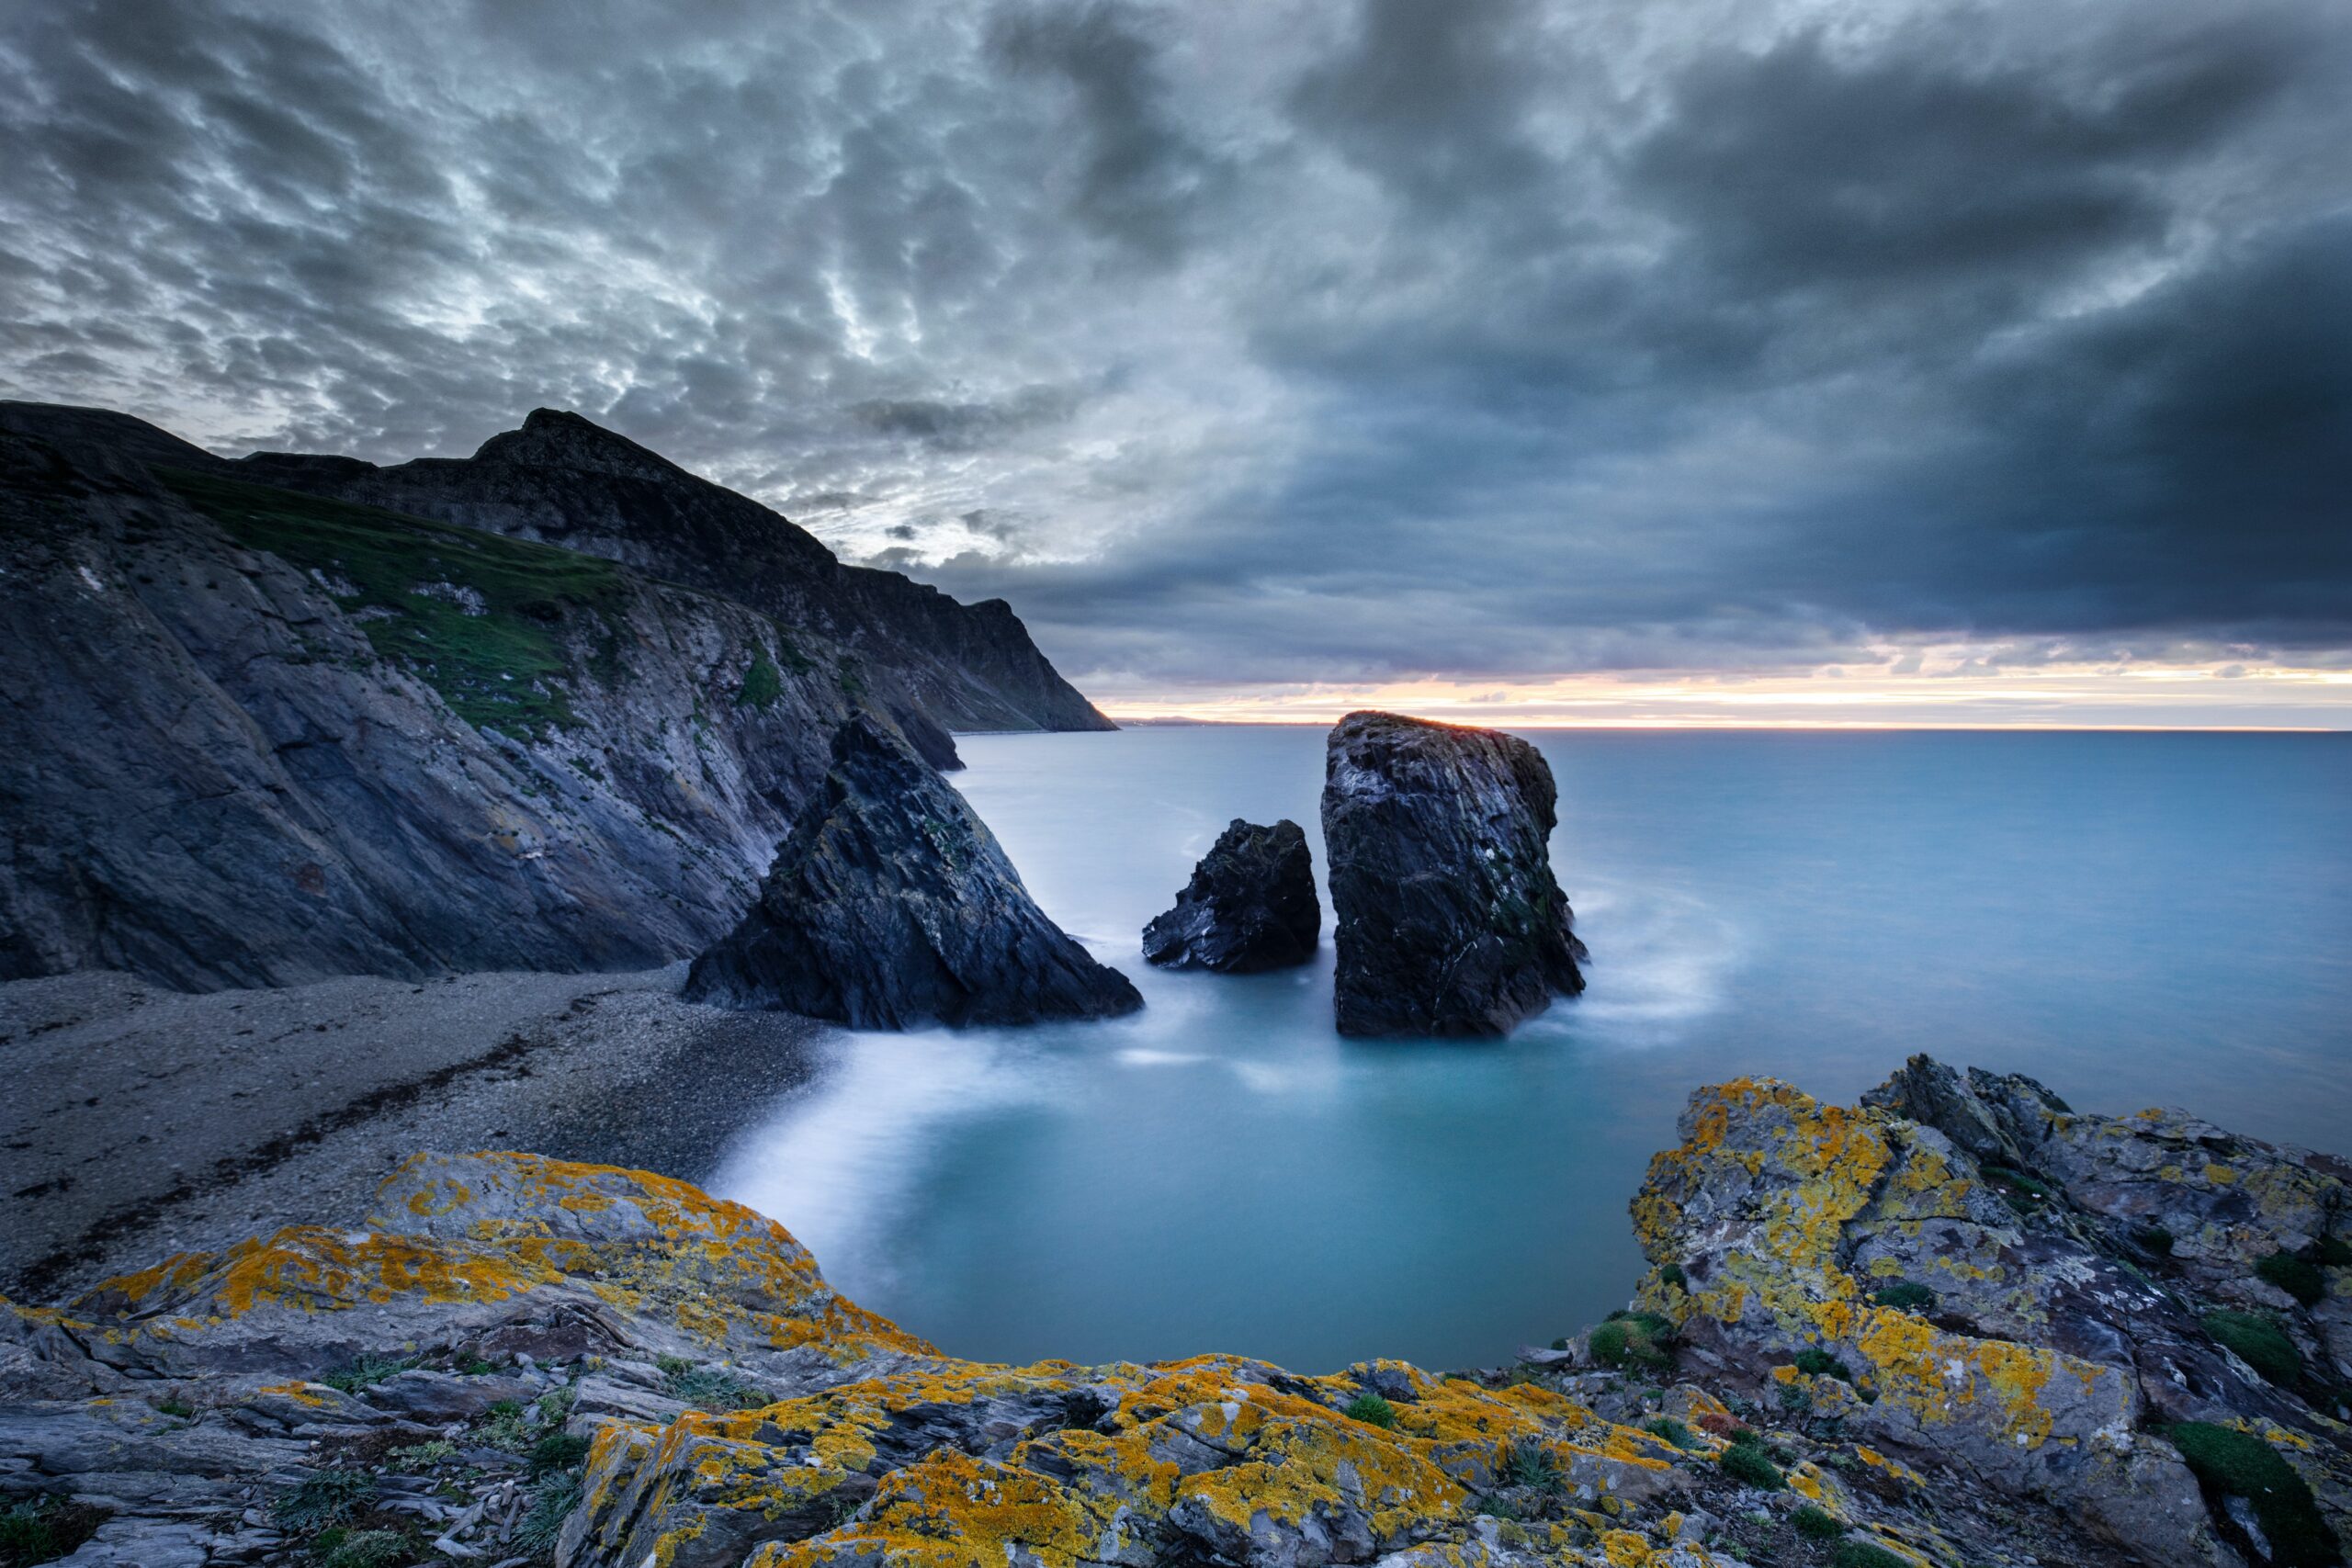 A beautiful picture of the Welsh coastline